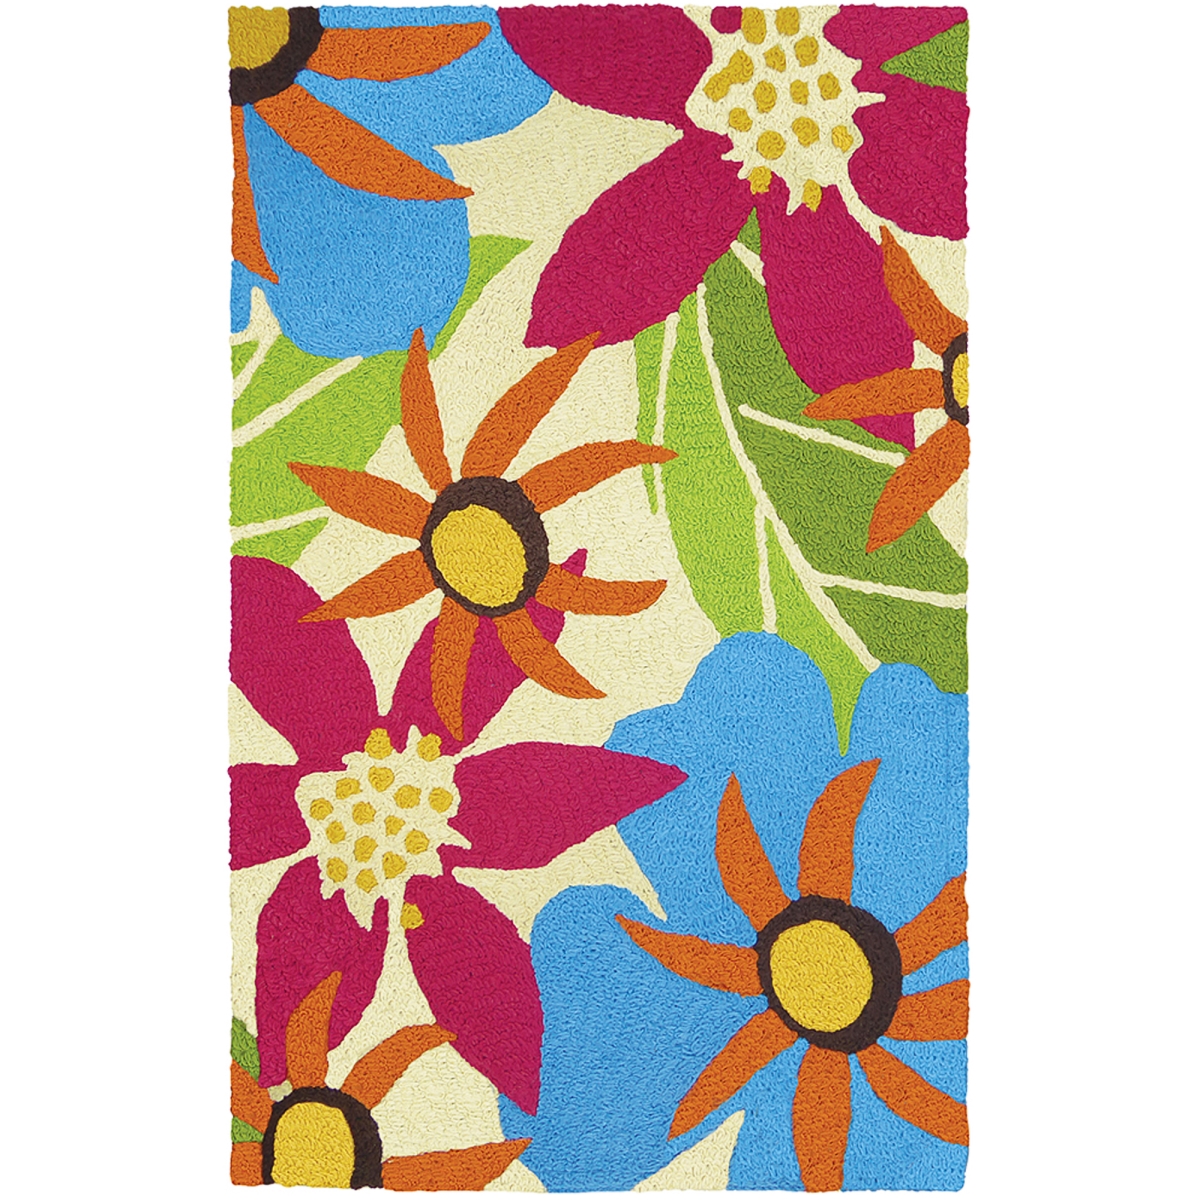 Jio-hd019c 34 X 54 In. Piccadilly Floral Indoor & Outdoor Area Rug